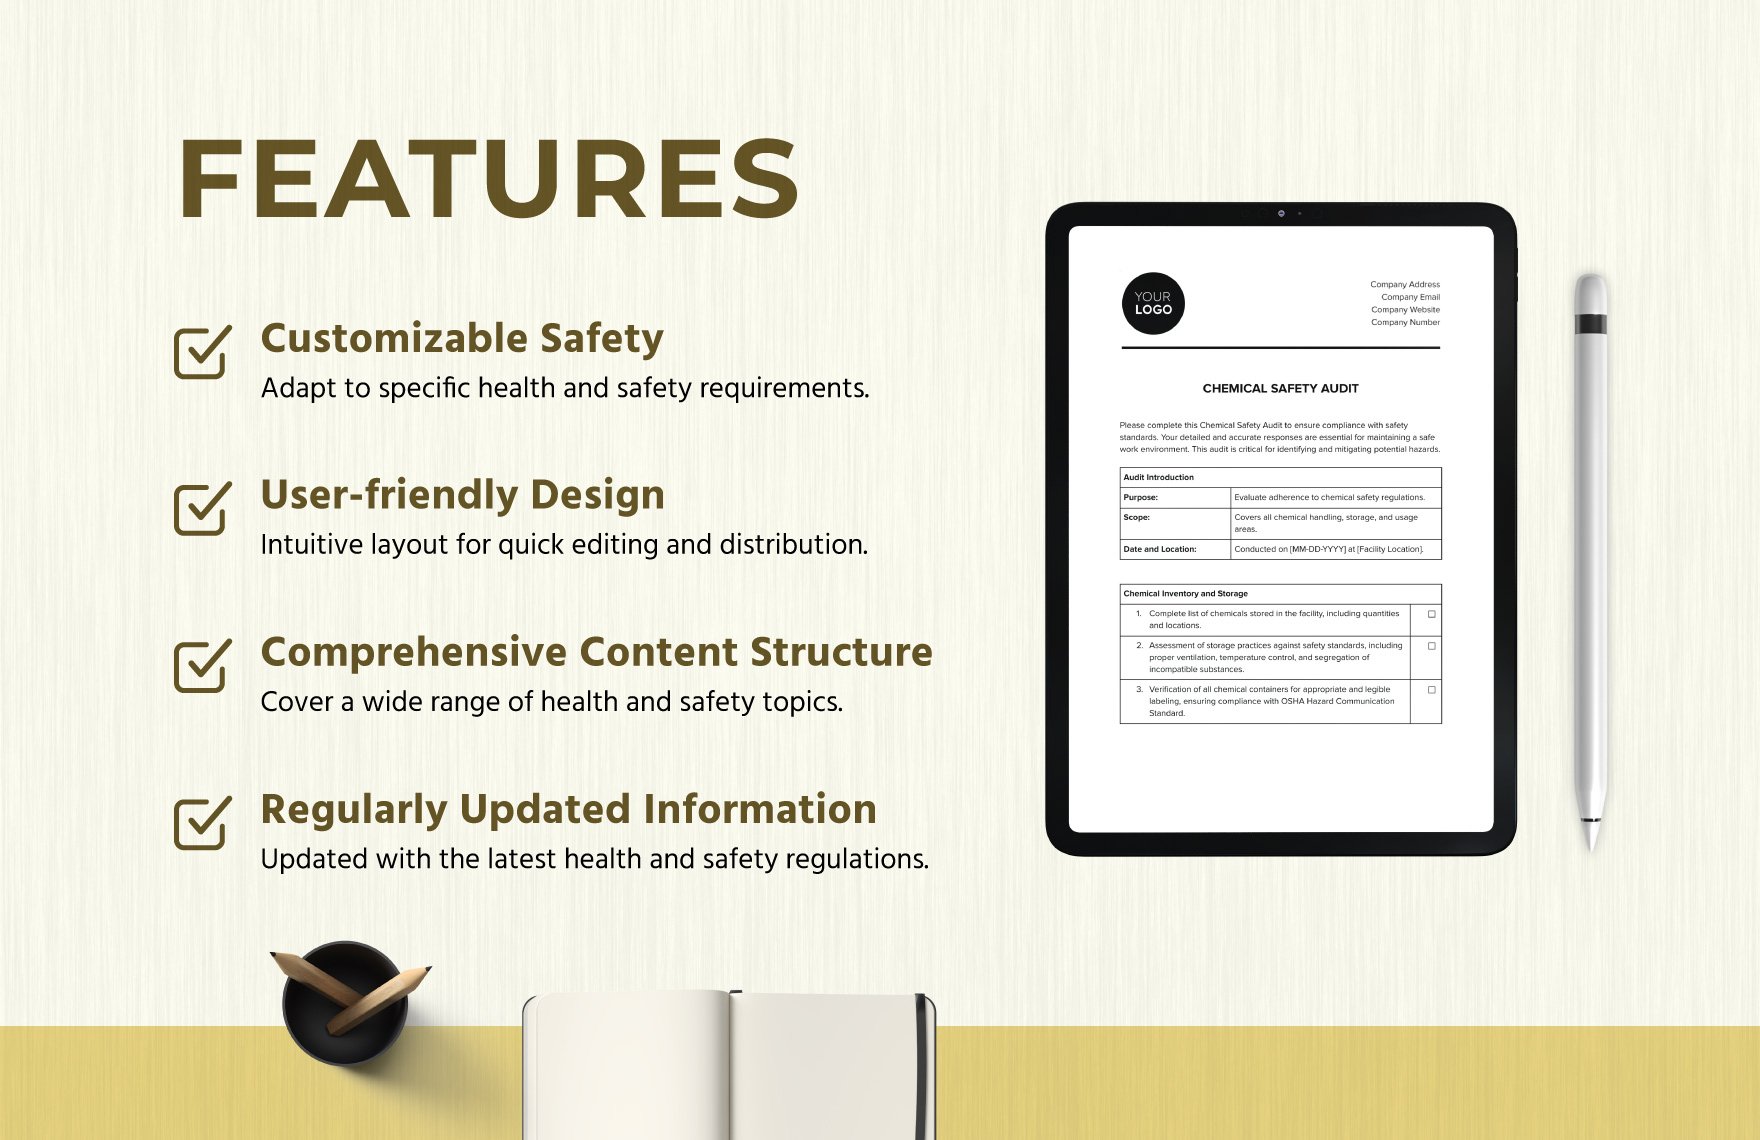 Chemical Safety Audit Template